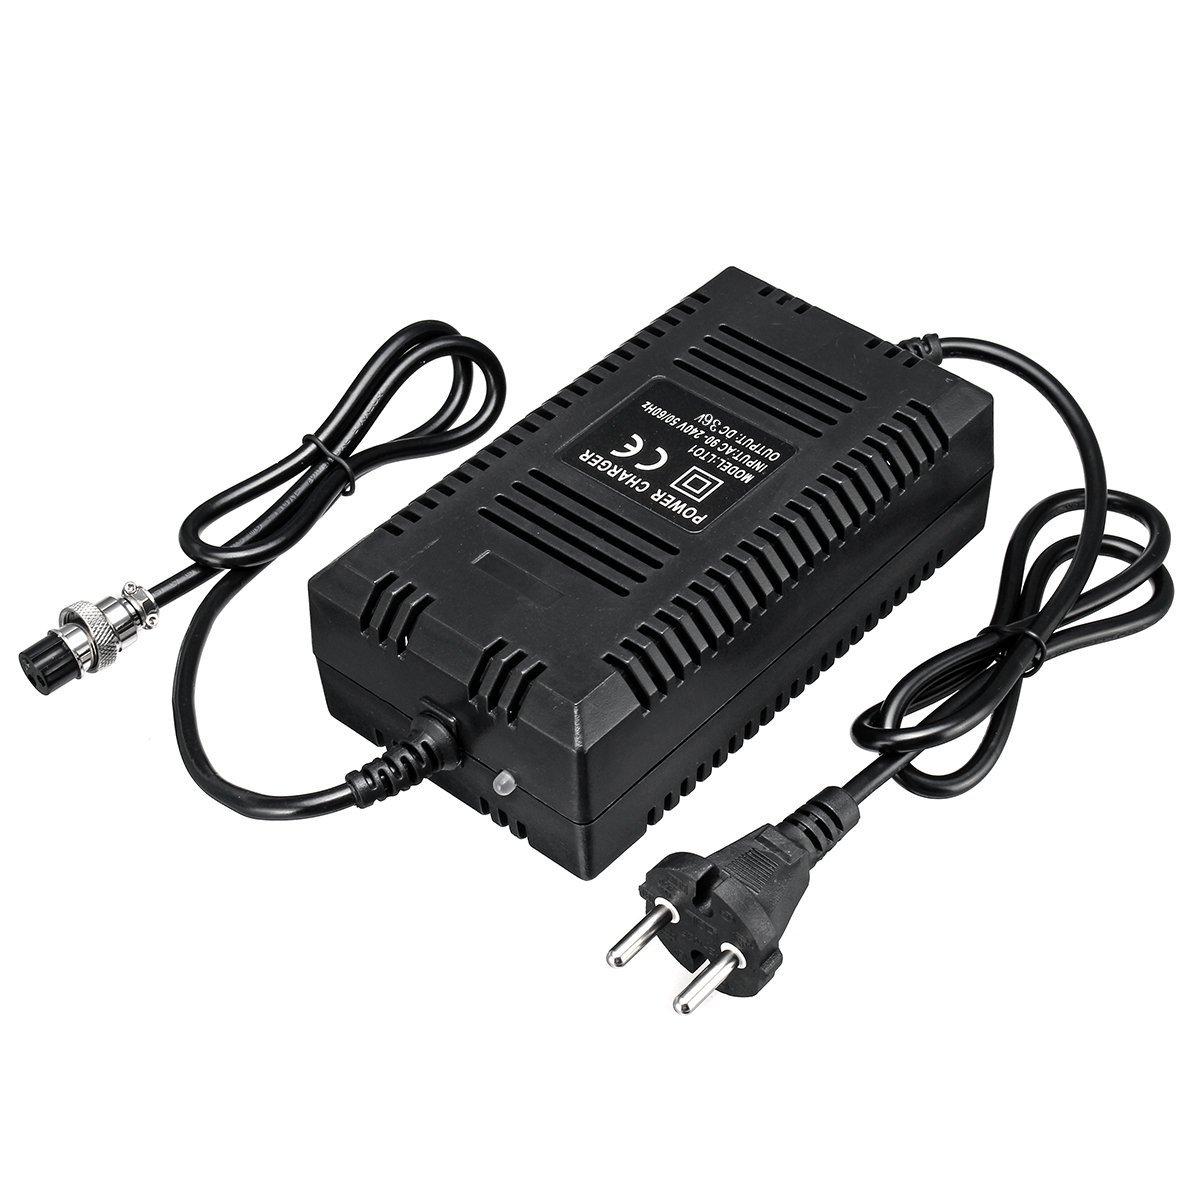 24SHOPZ 36V 1.8A Lead- Battery Charger Electric Car Vehicle Scooter Bicycle Charger